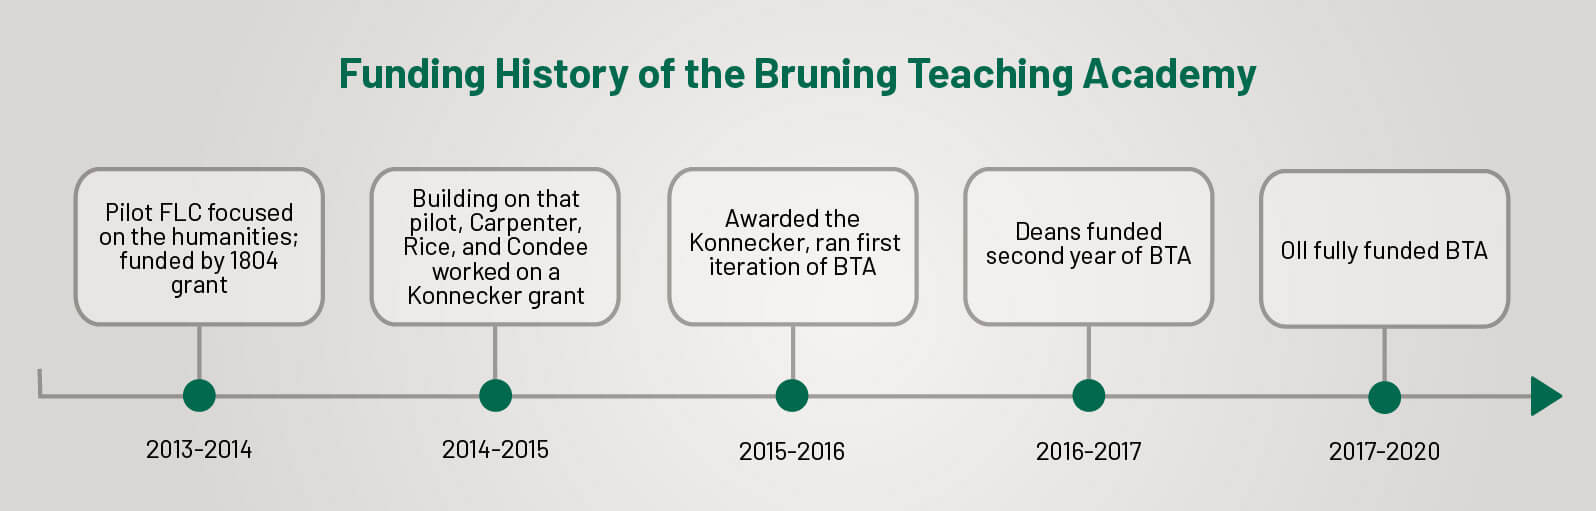 Funding history of the Bruning Teaching Academy